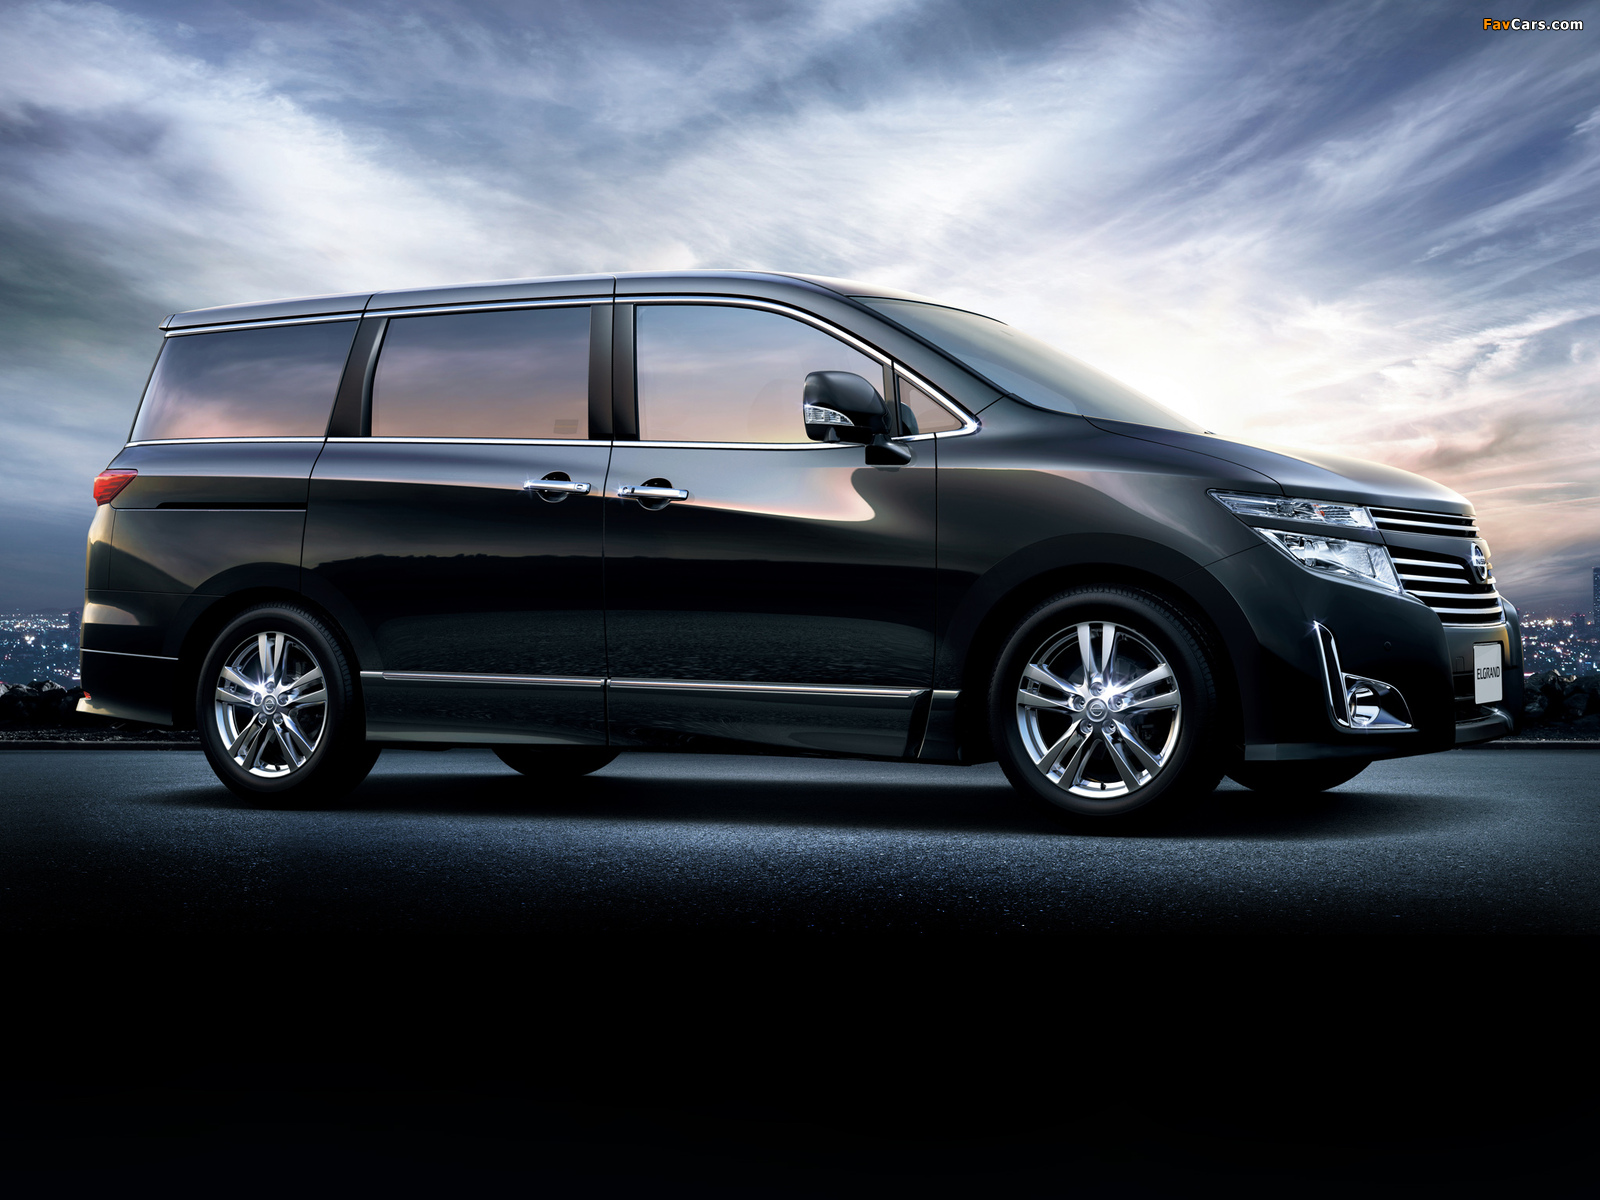 Nissan Elgrand Highway Star (E52) 2010 pictures (1600 x 1200)